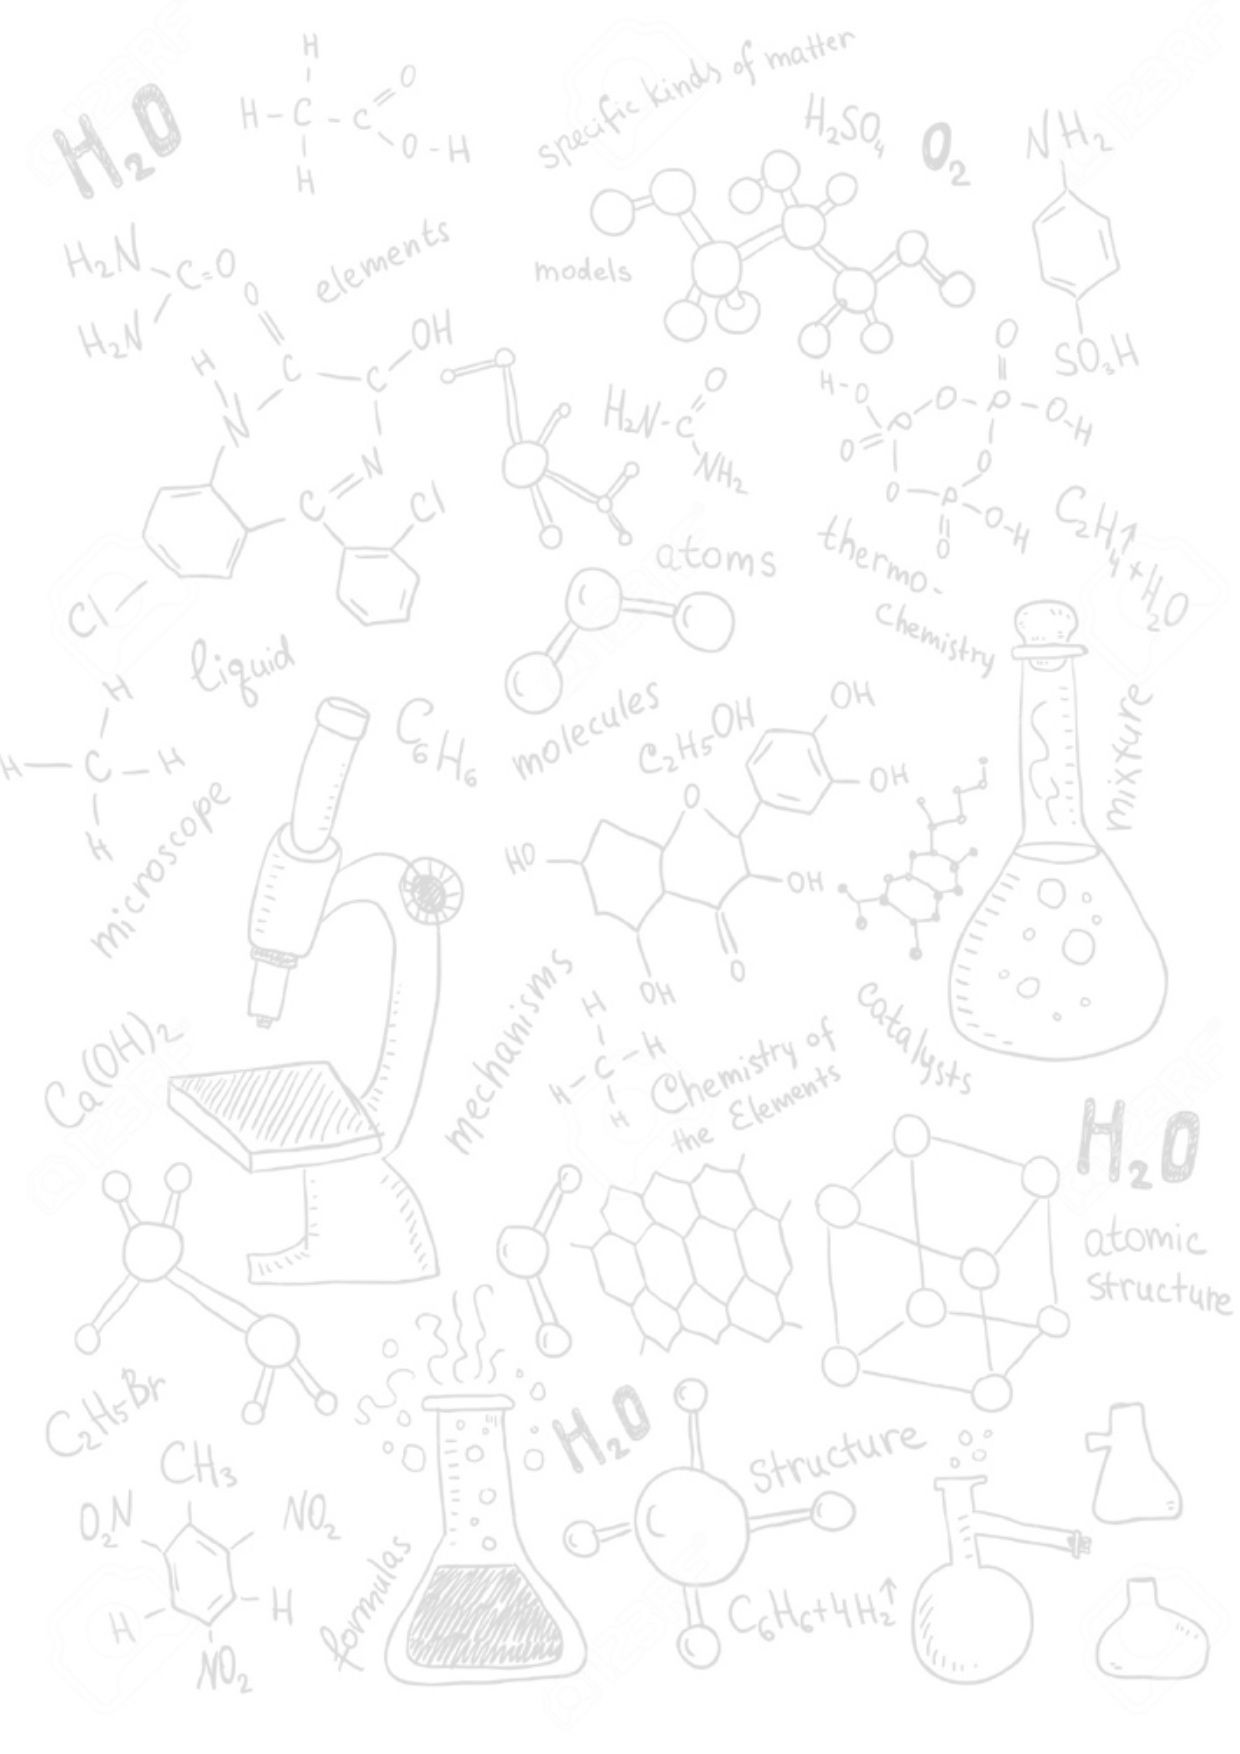 A drawing of chemistry elements, including molecules, atoms, and structures. - Chemistry